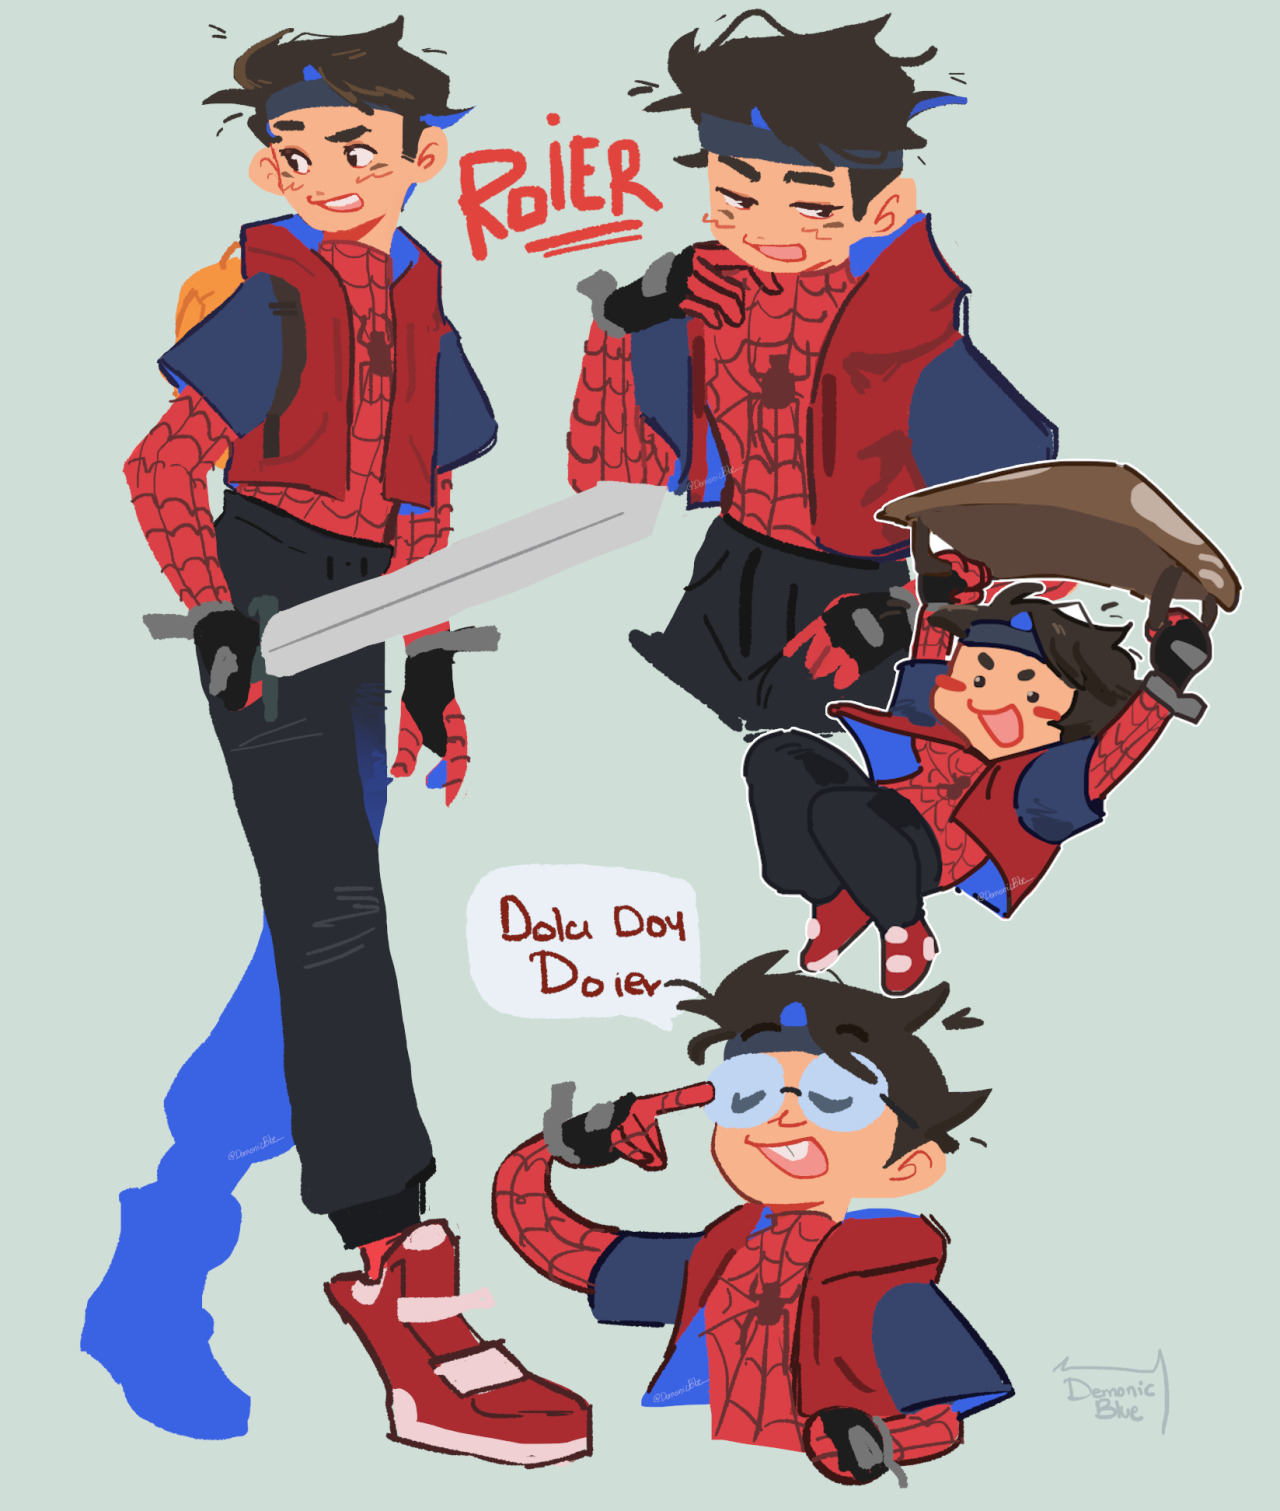 A collage of mulitple drawings of Roier. He wears a similar outfit to his skin, but his shirt is the top of the Spiderman costume, and he wears a loose short-sleeved jaket over it. He also wears a blue ribbon tied around his head like a headband, and black fingerless gloves. He's depicted in various poses, one with his sword ready, one laughing, one using a hang glider, and one as his alter-ego Doied, a nerdy character with glasses.